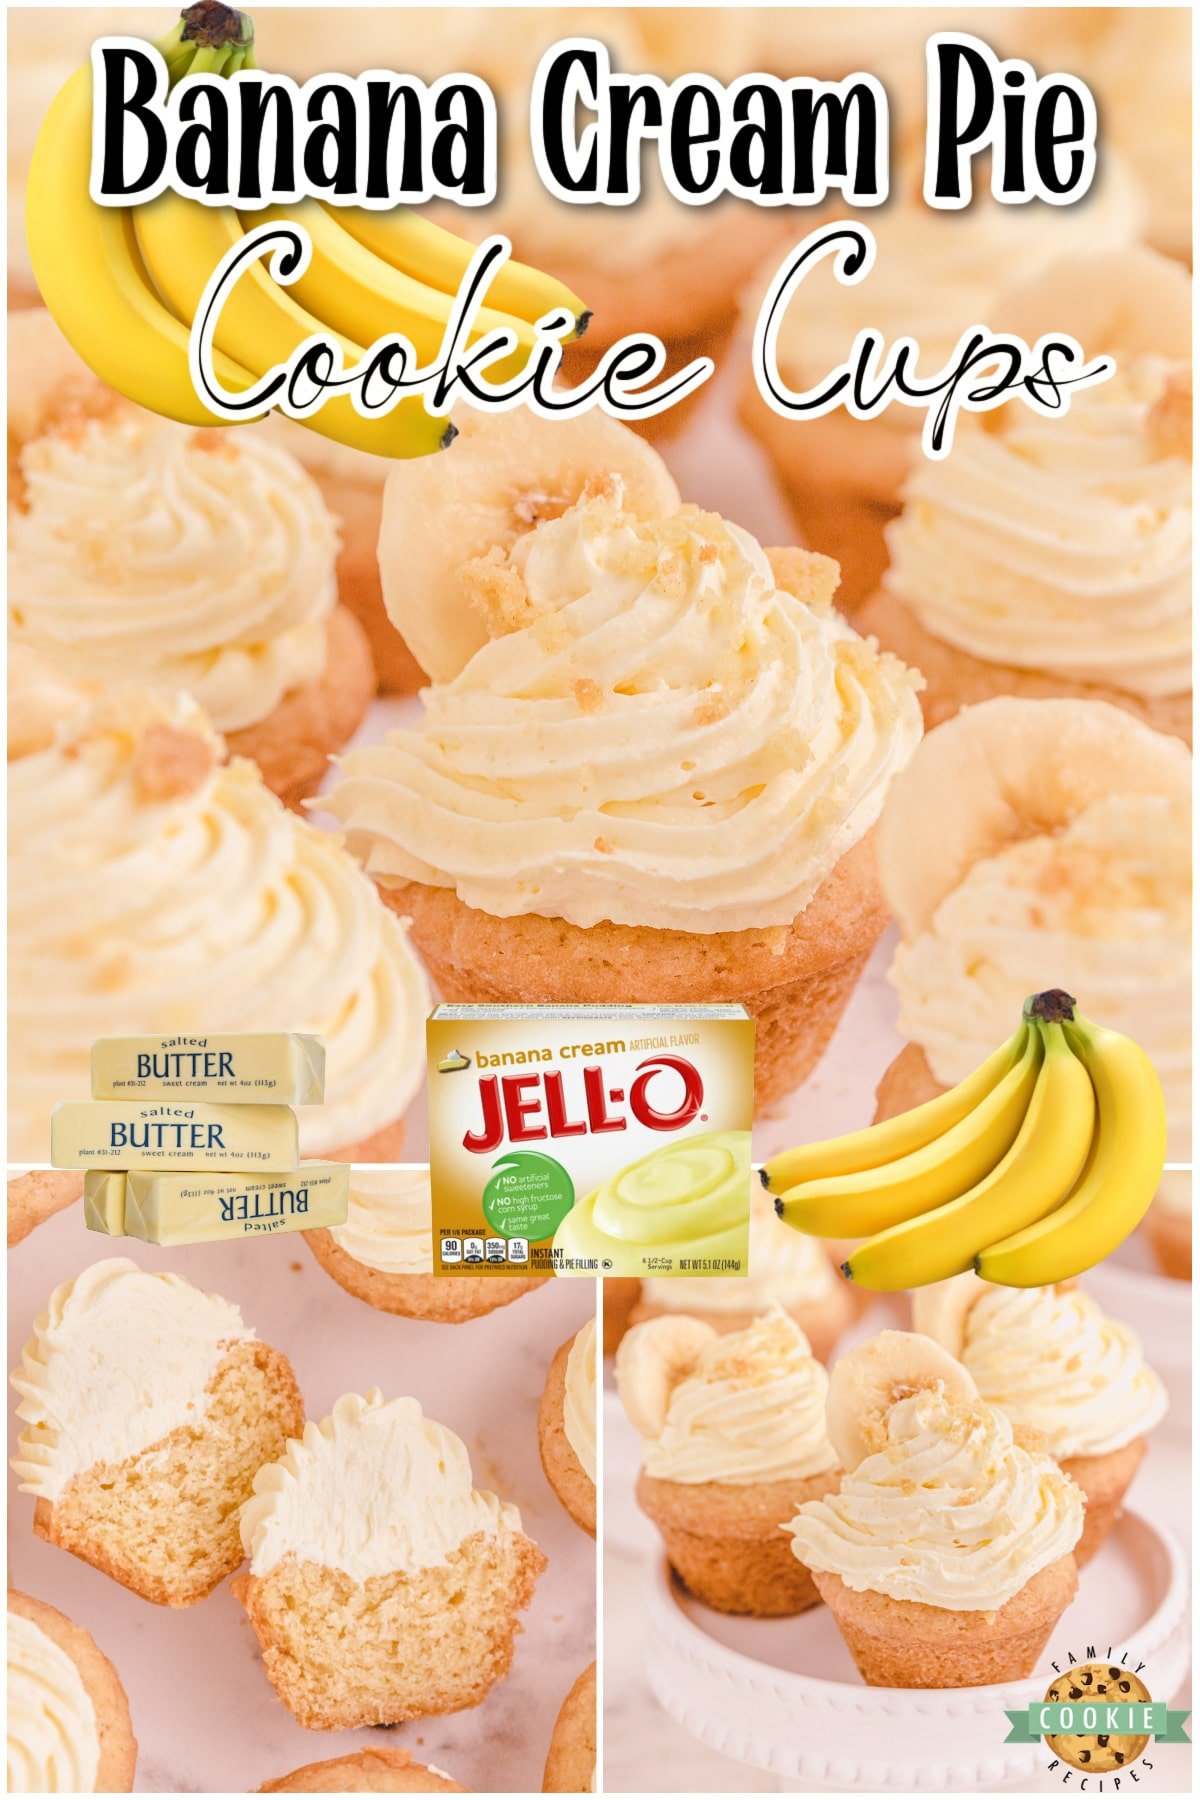 Banana Cream Pie Cookies are the perfect way to enjoy Banana Cream Pie without having to deal with  pie crust! Lovely bite-sized banana cream pie dessert recipe perfect for parties.